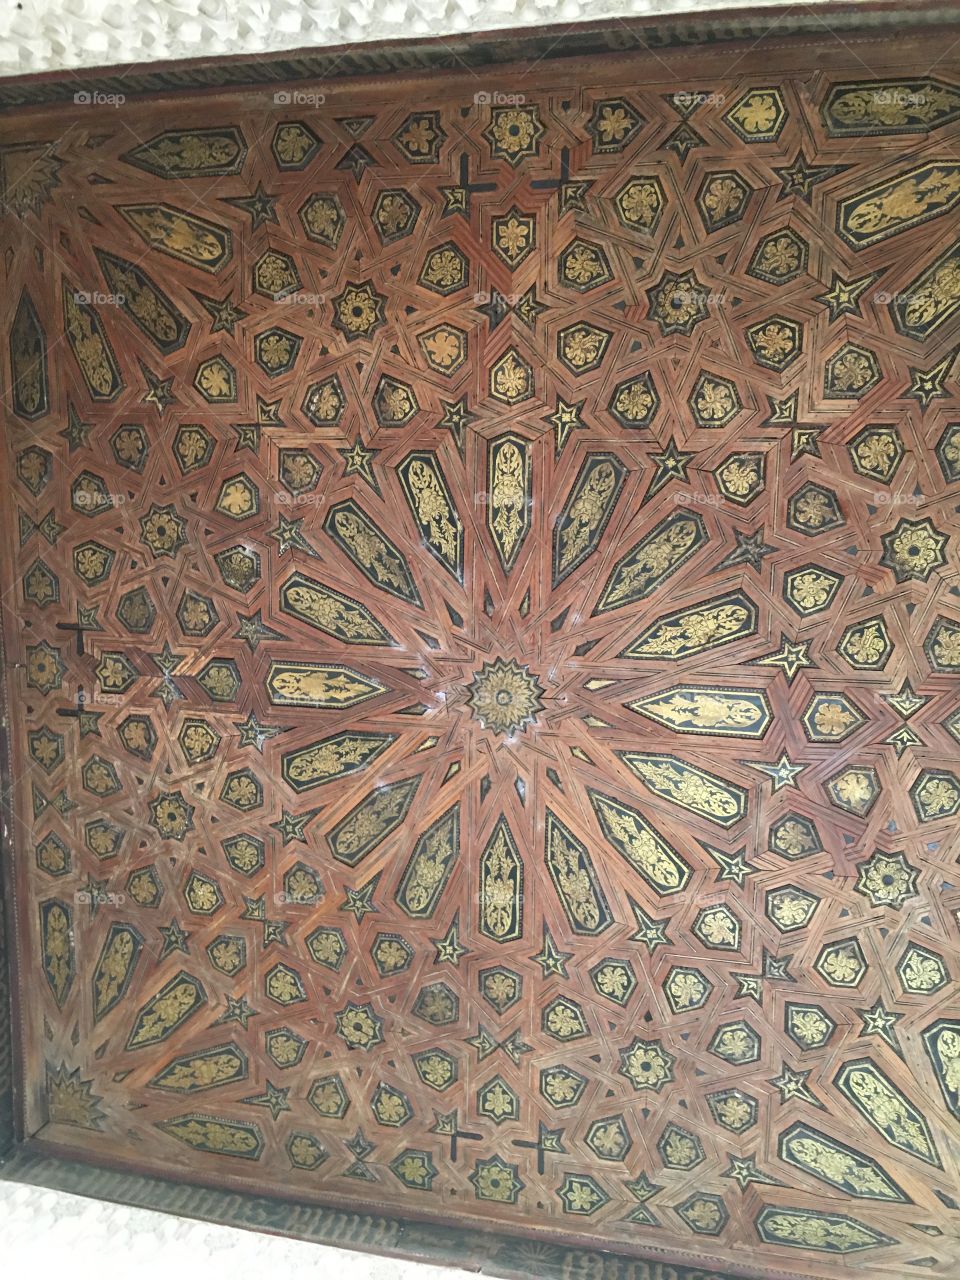 Ceiling woodwork at the Alhambra in Granada, Spain 